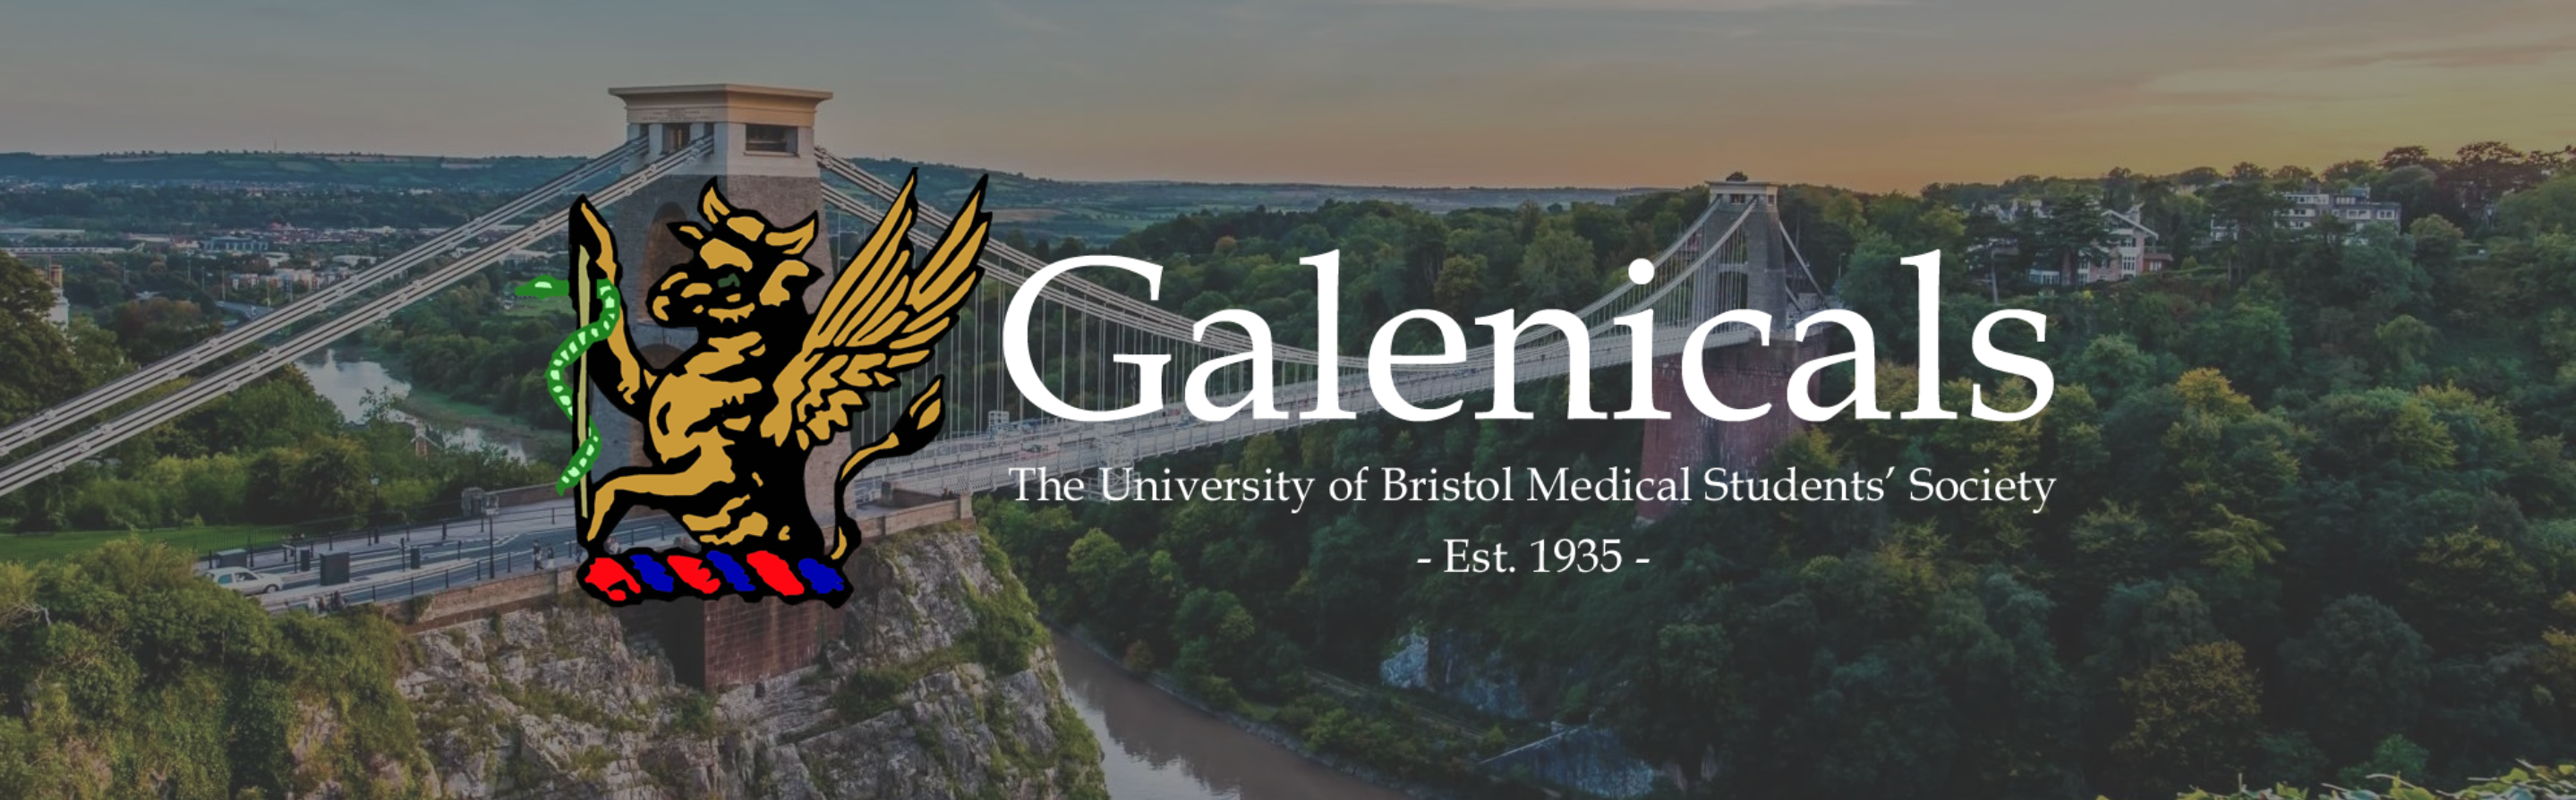 Banner for Galenicals - Bristol Medical Students' Society